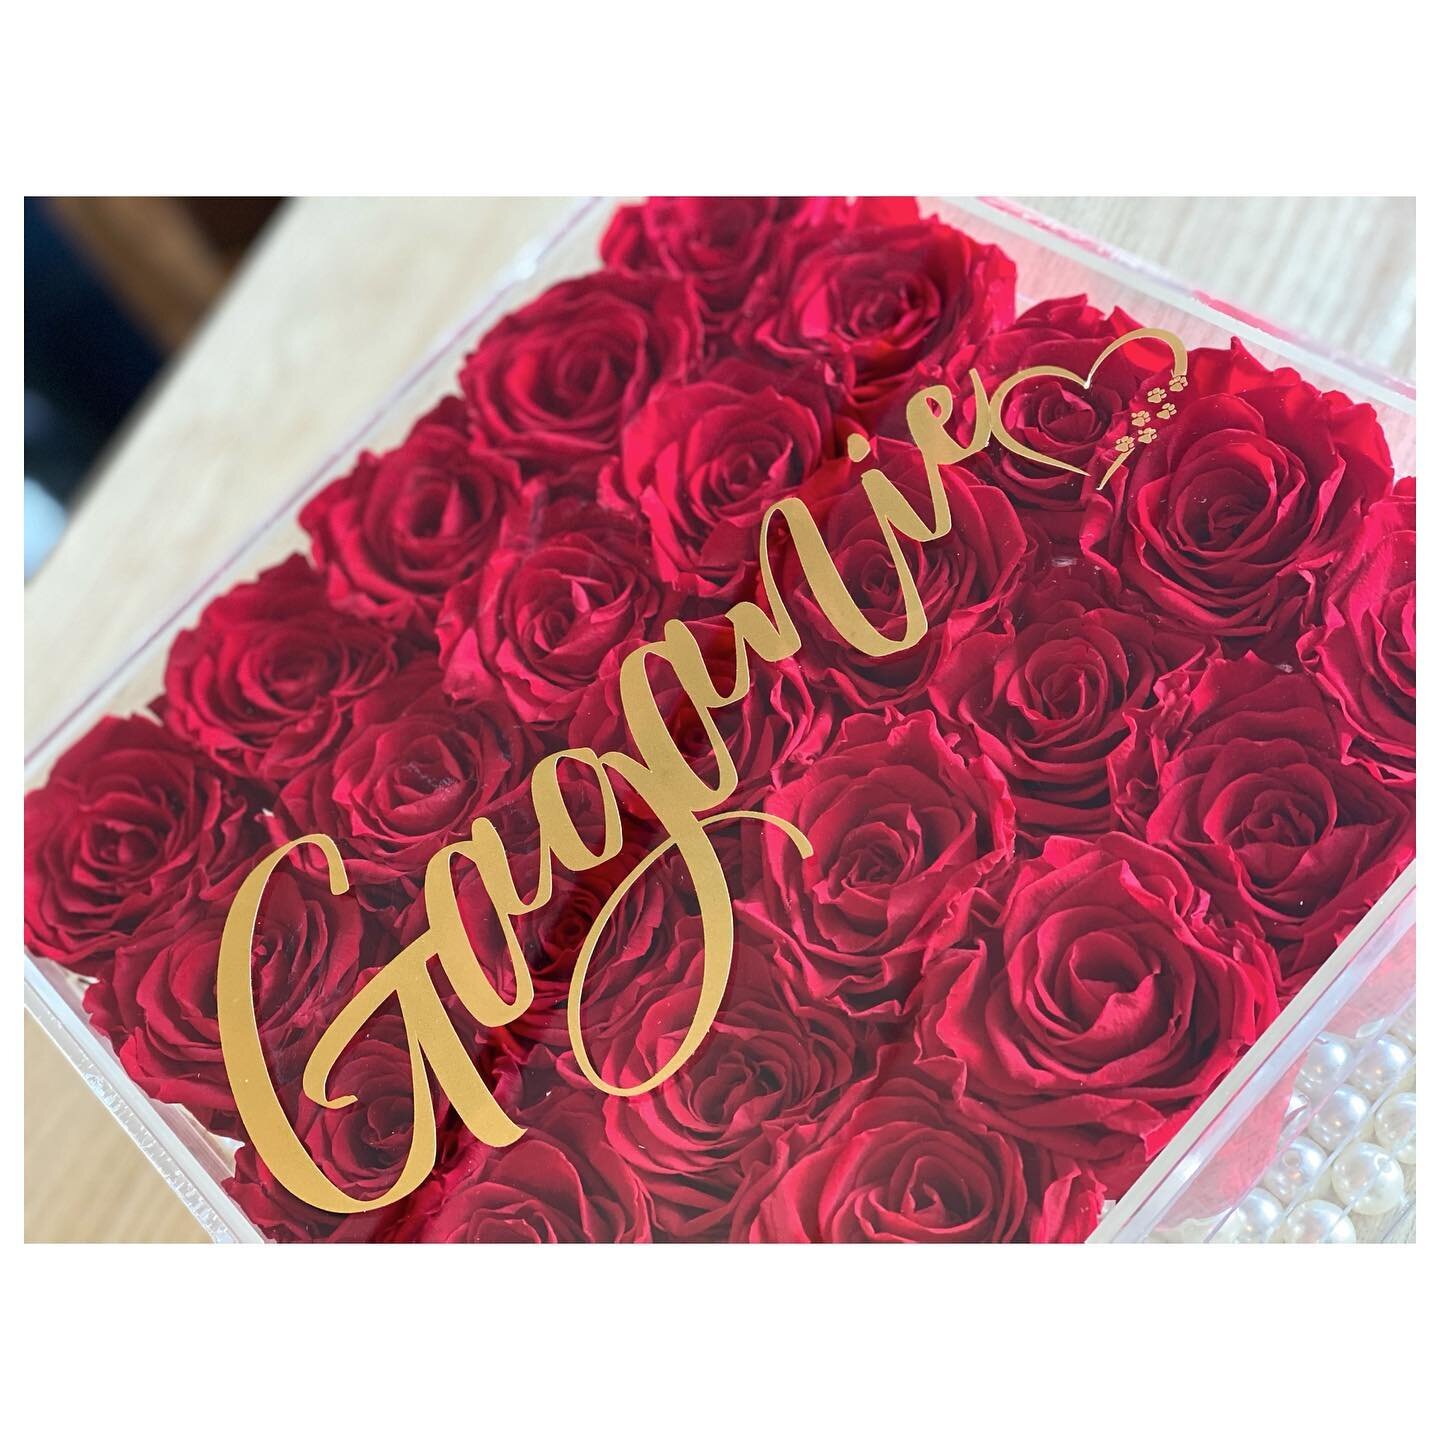 One of our favourite Eternal Rose Boxes to date &hearts;️🐾 25 Beautiful Red Roses, designed to Last 1 to 3 Years &amp; More 🧿
.
S h o p 🌹 O n l i n e . at www.pinkpetals.ca
.
For all of your wedding or event floral needs, please contact Pink Petal